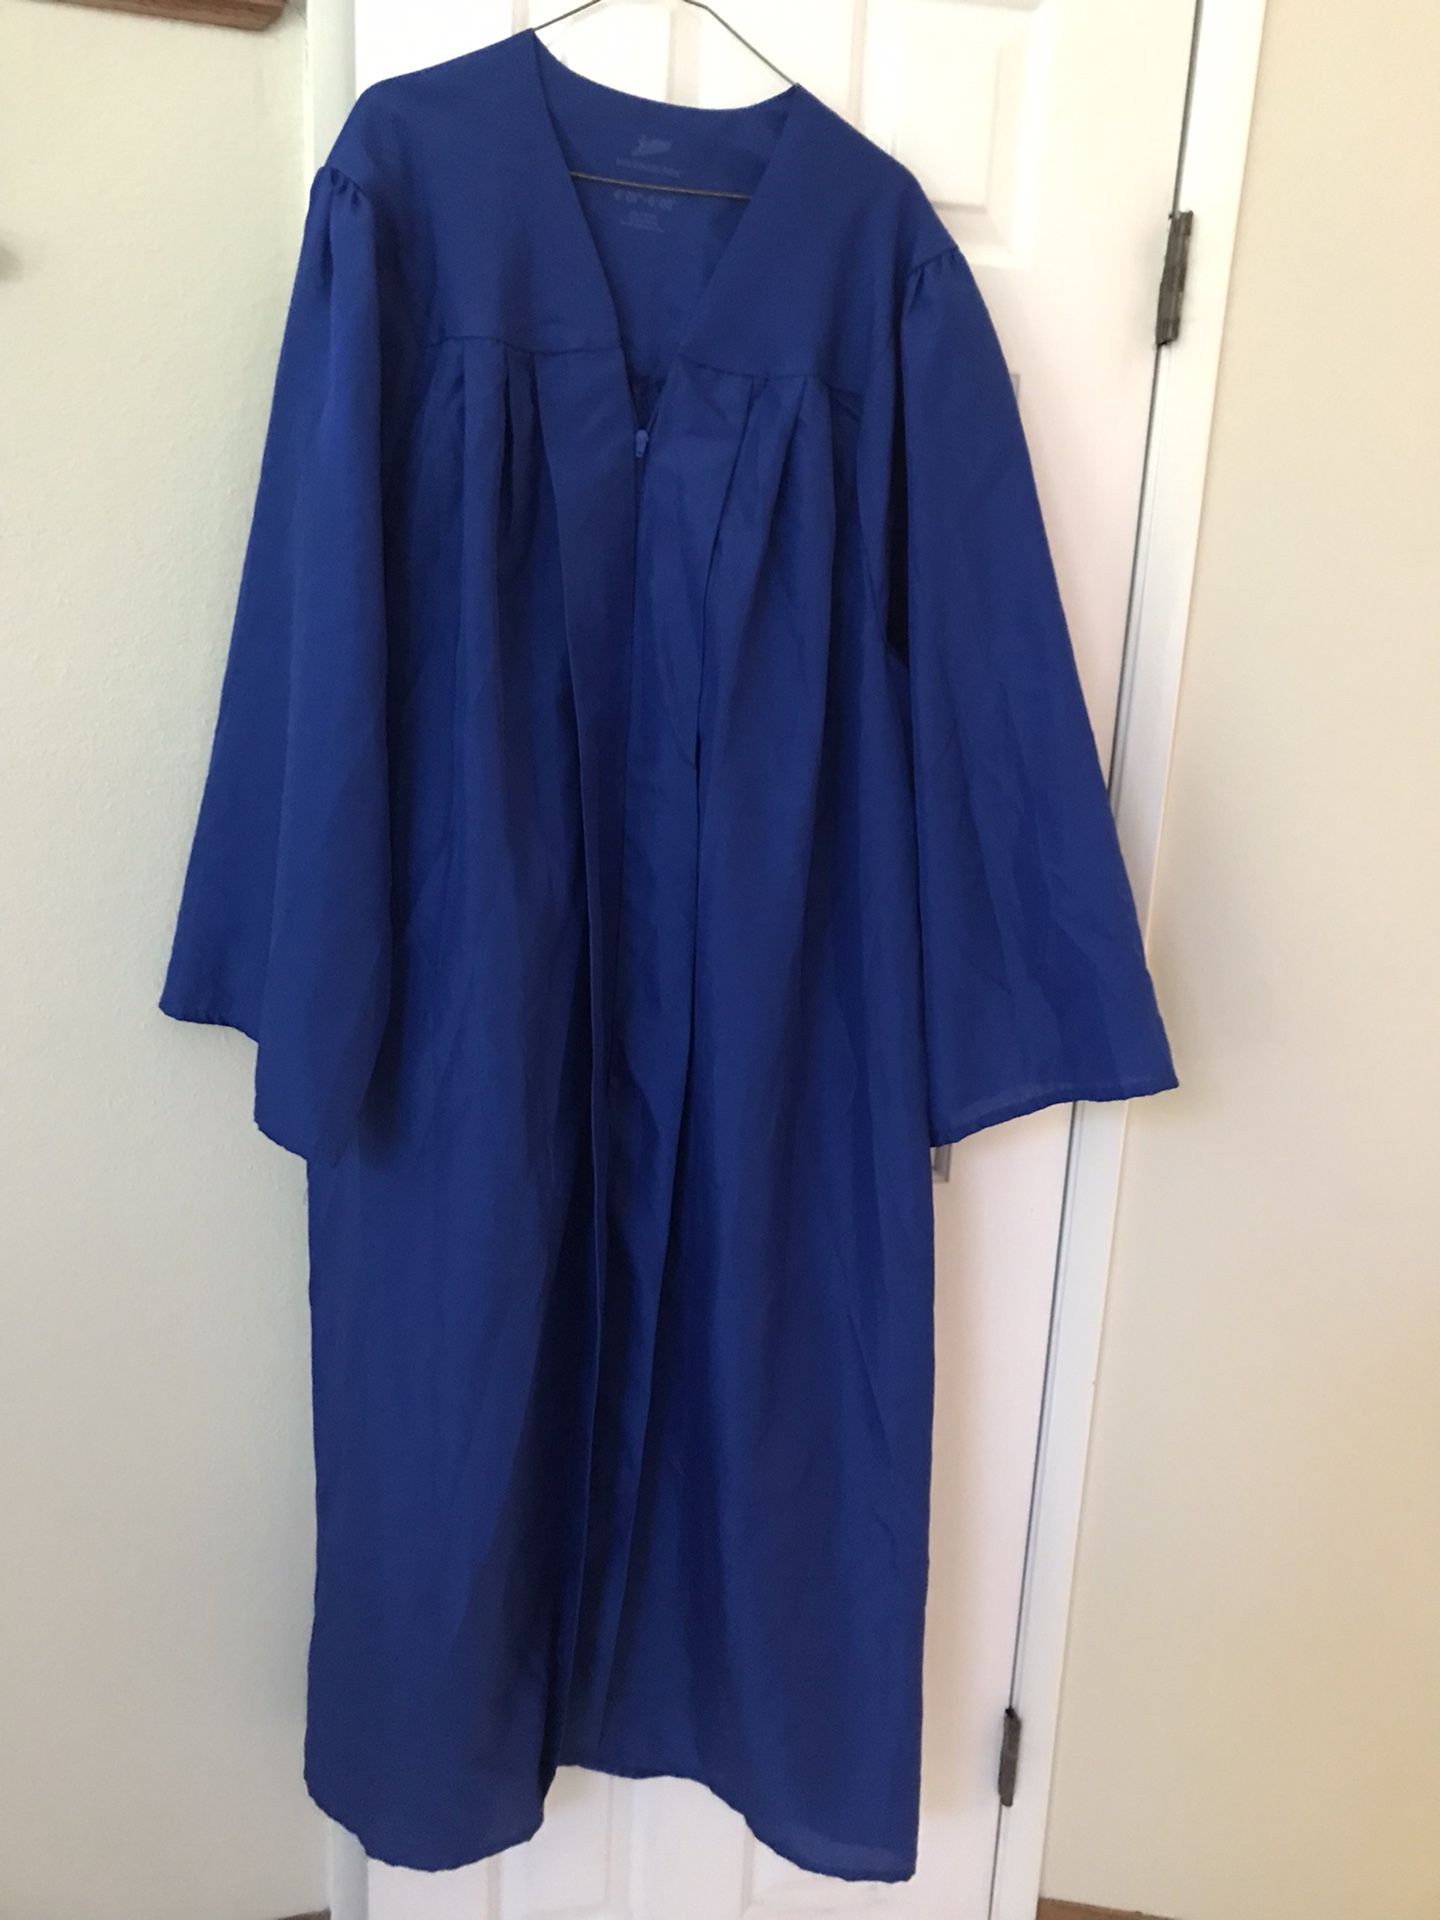 Jostens Royal Blue Graduation Gown Only, 6’1” - 6’3”